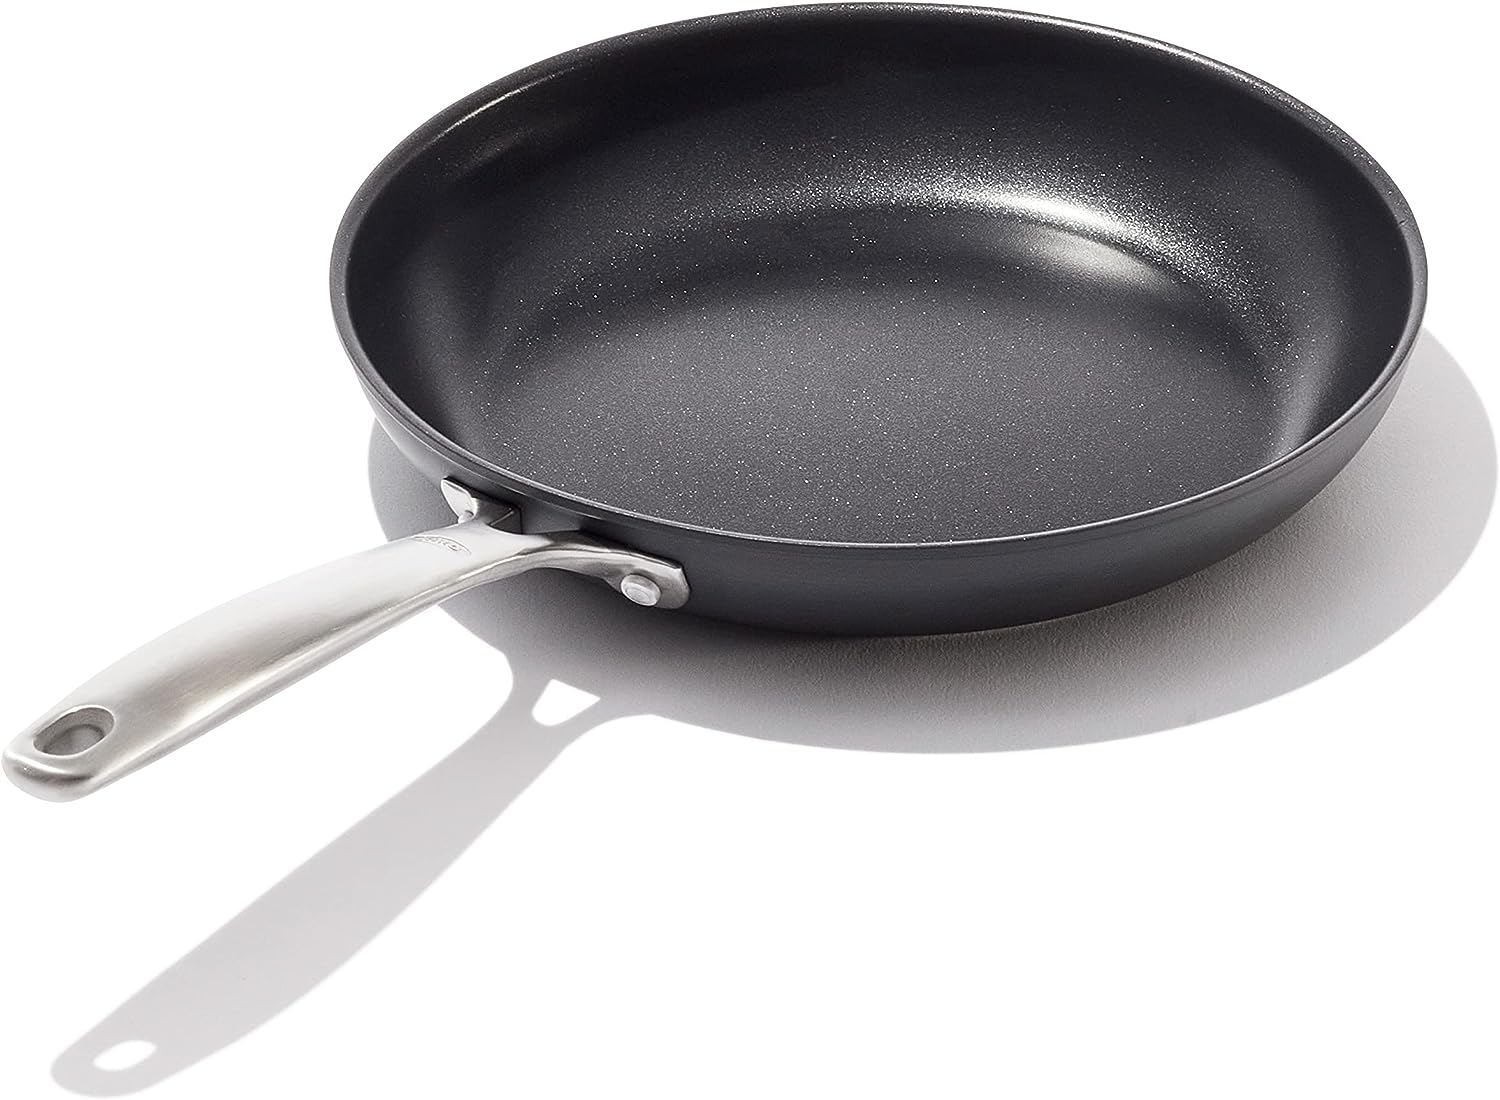 best nonstick pan to cook on electric stove